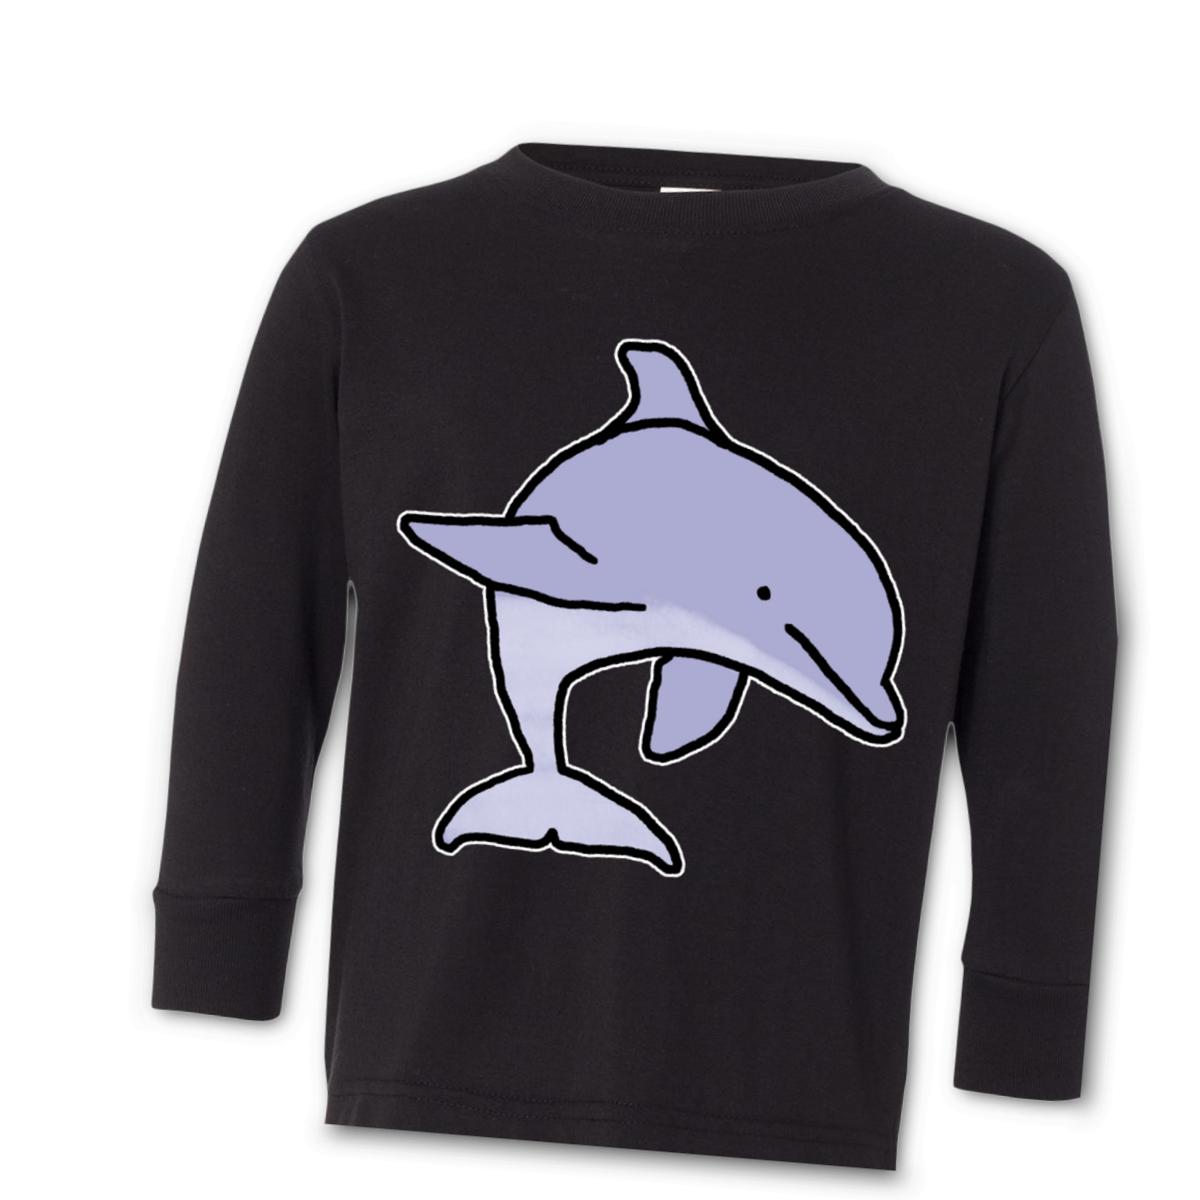 Dolphin Toddler Long Sleeve Tee 2T black